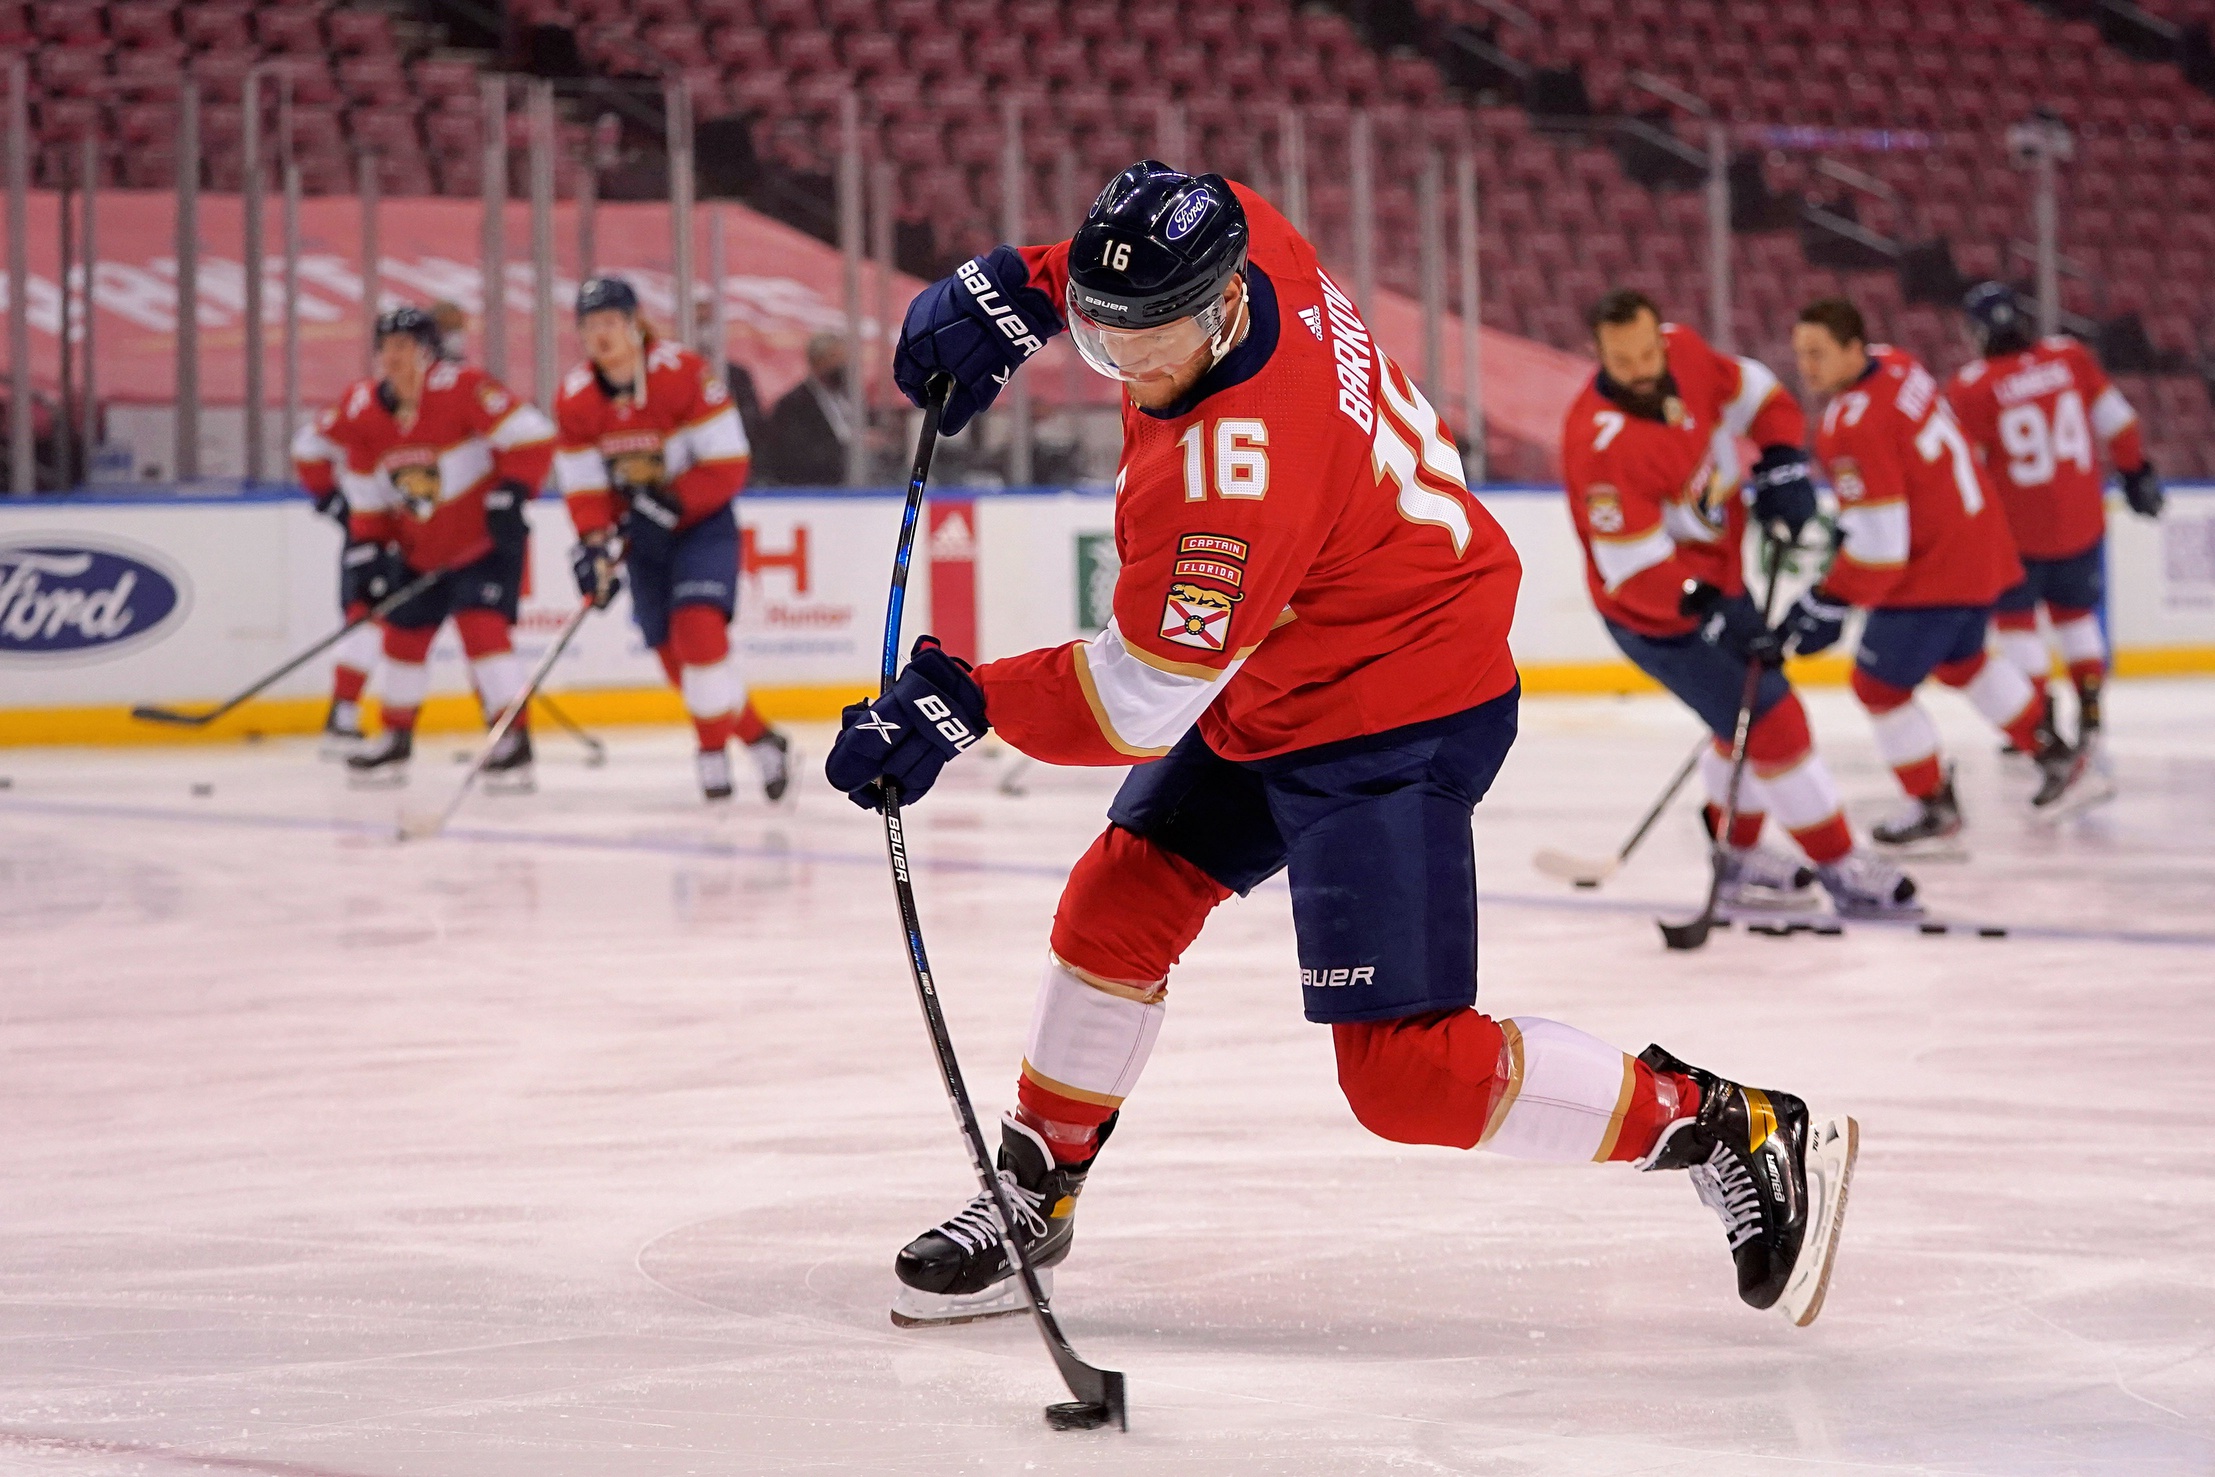 Aleksander Barkov recorded 58 points in 50 games for the Florida Panthers last season